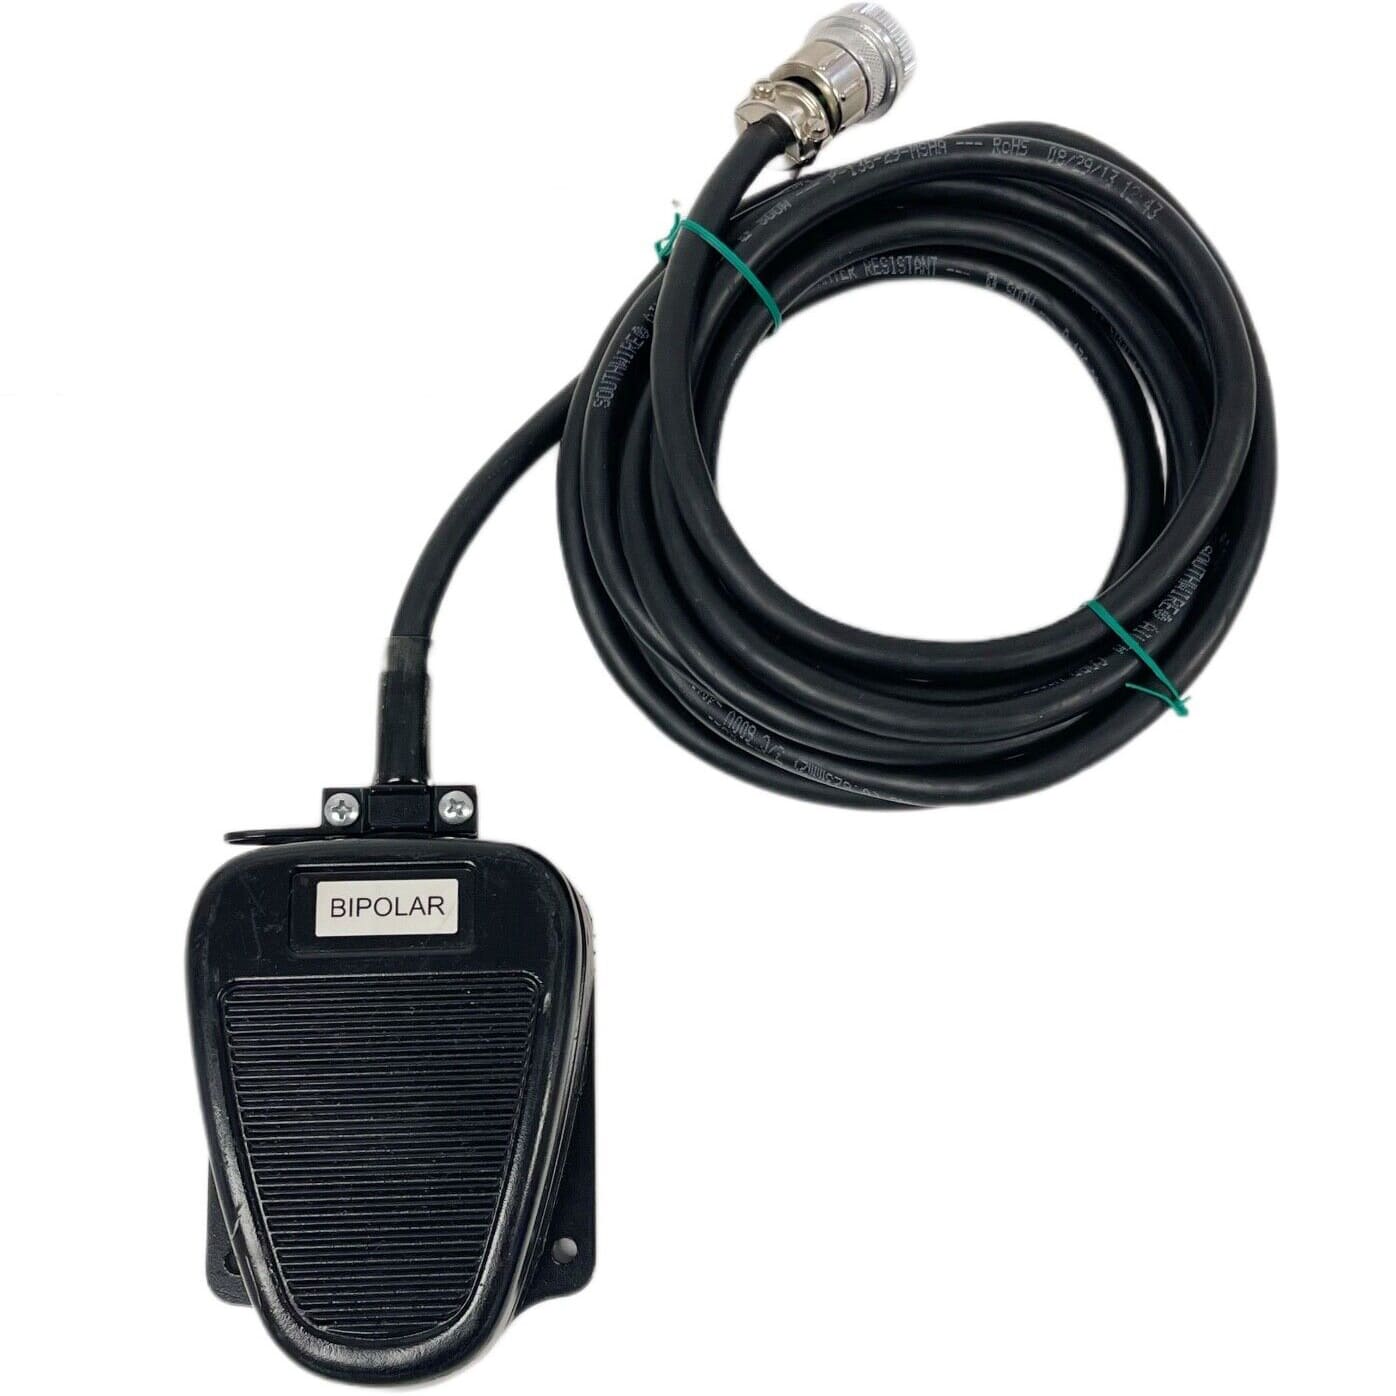 Valleylab E6009 Bipolar Footswitch with cord